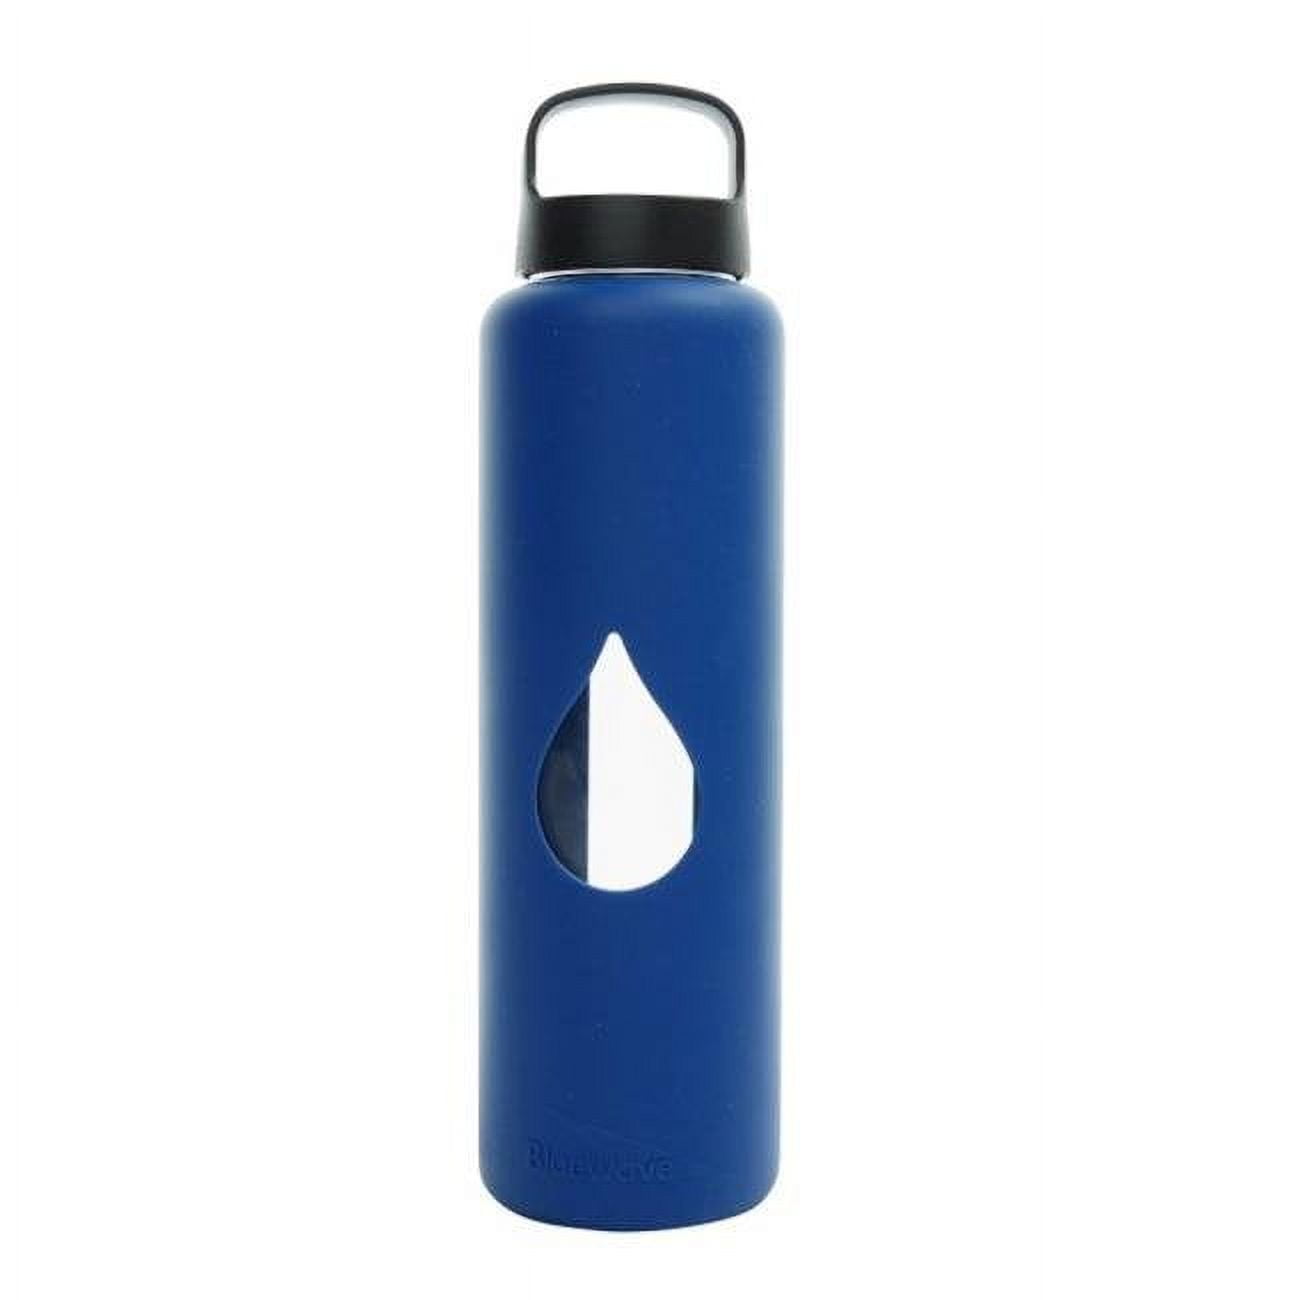 Picture of Bluewave Lifestyle GG150LC-Blue Reusable Glass Water Bottle with Loop Cap & Free Silicone Sleeve - Sky Blue, 750 ml.